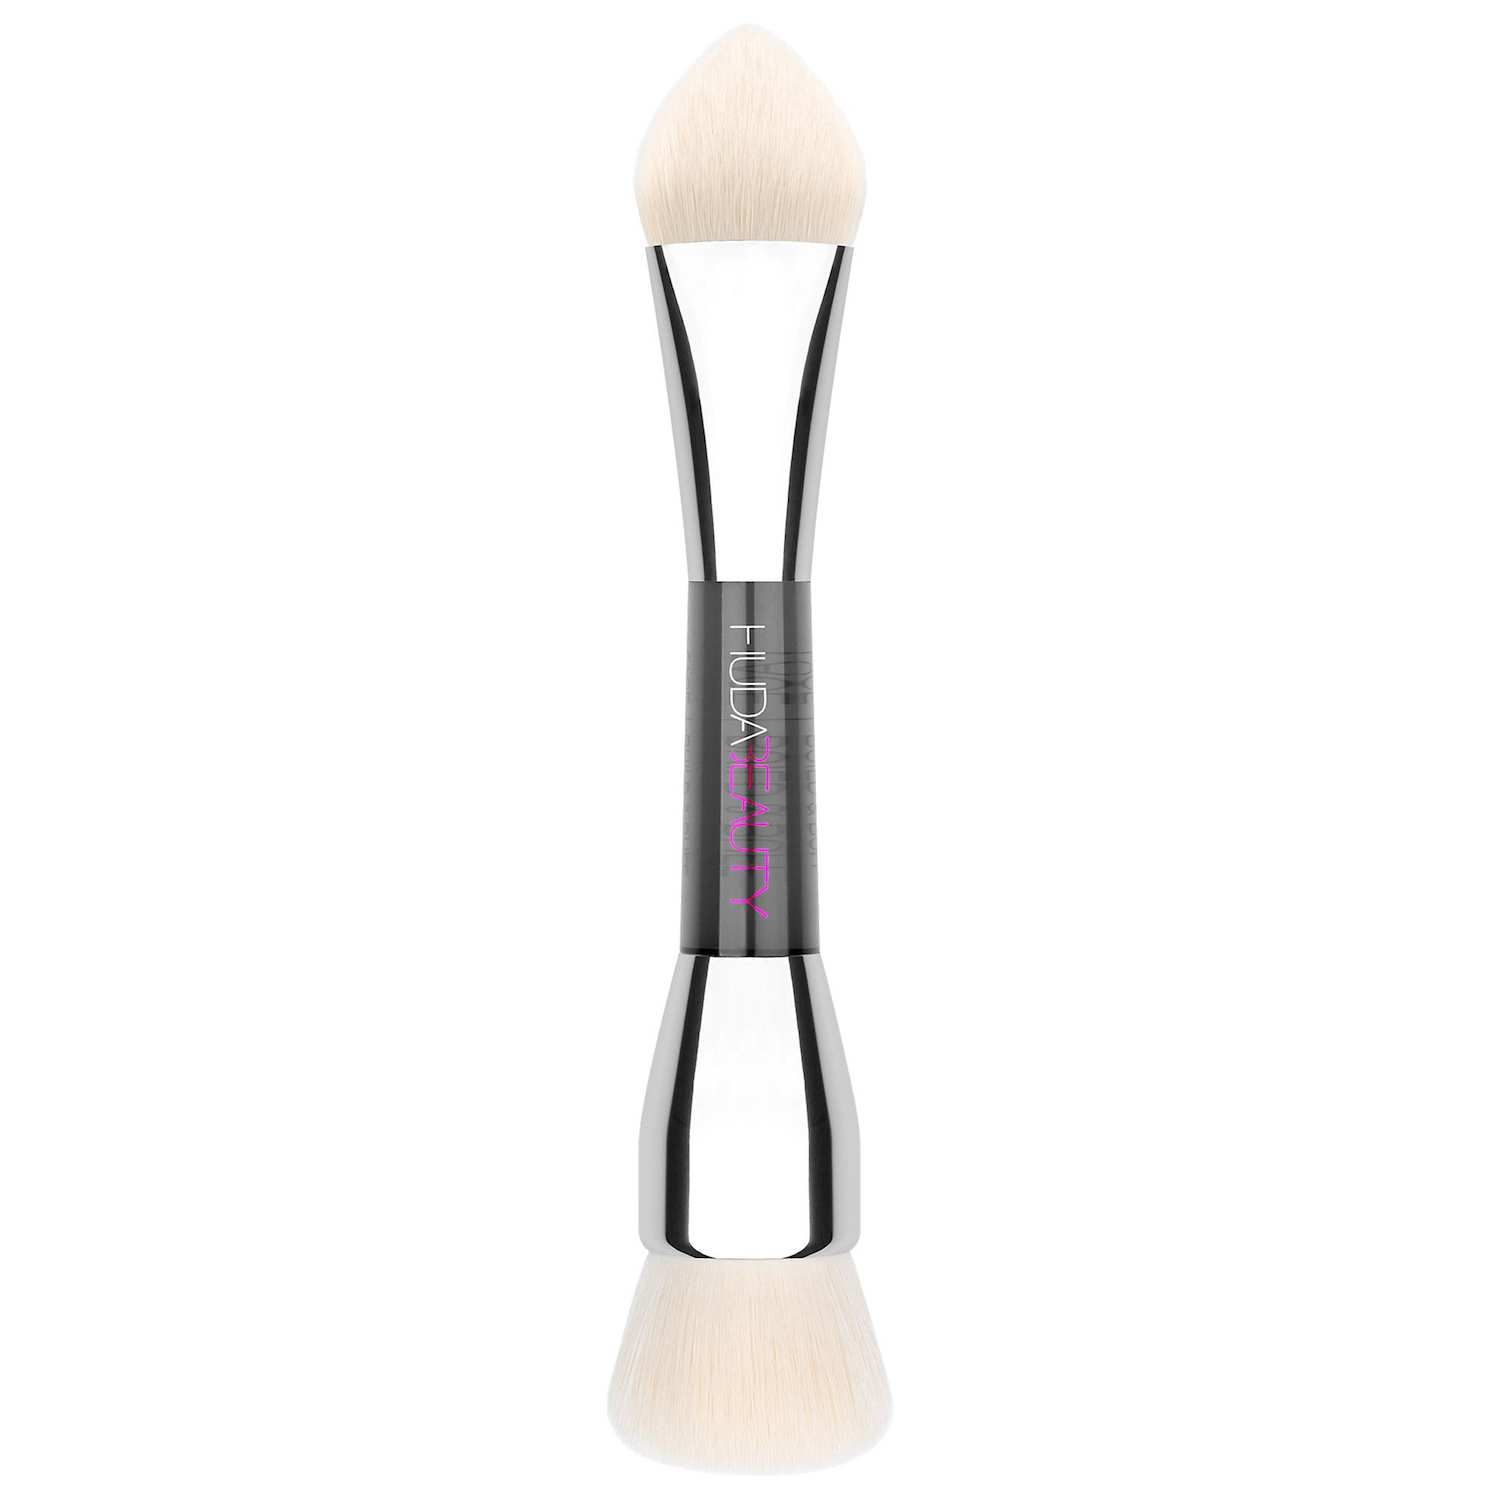 Image for HUDA BEAUTY Build and Buff Double Ended Foundation Brush at Kohl's.